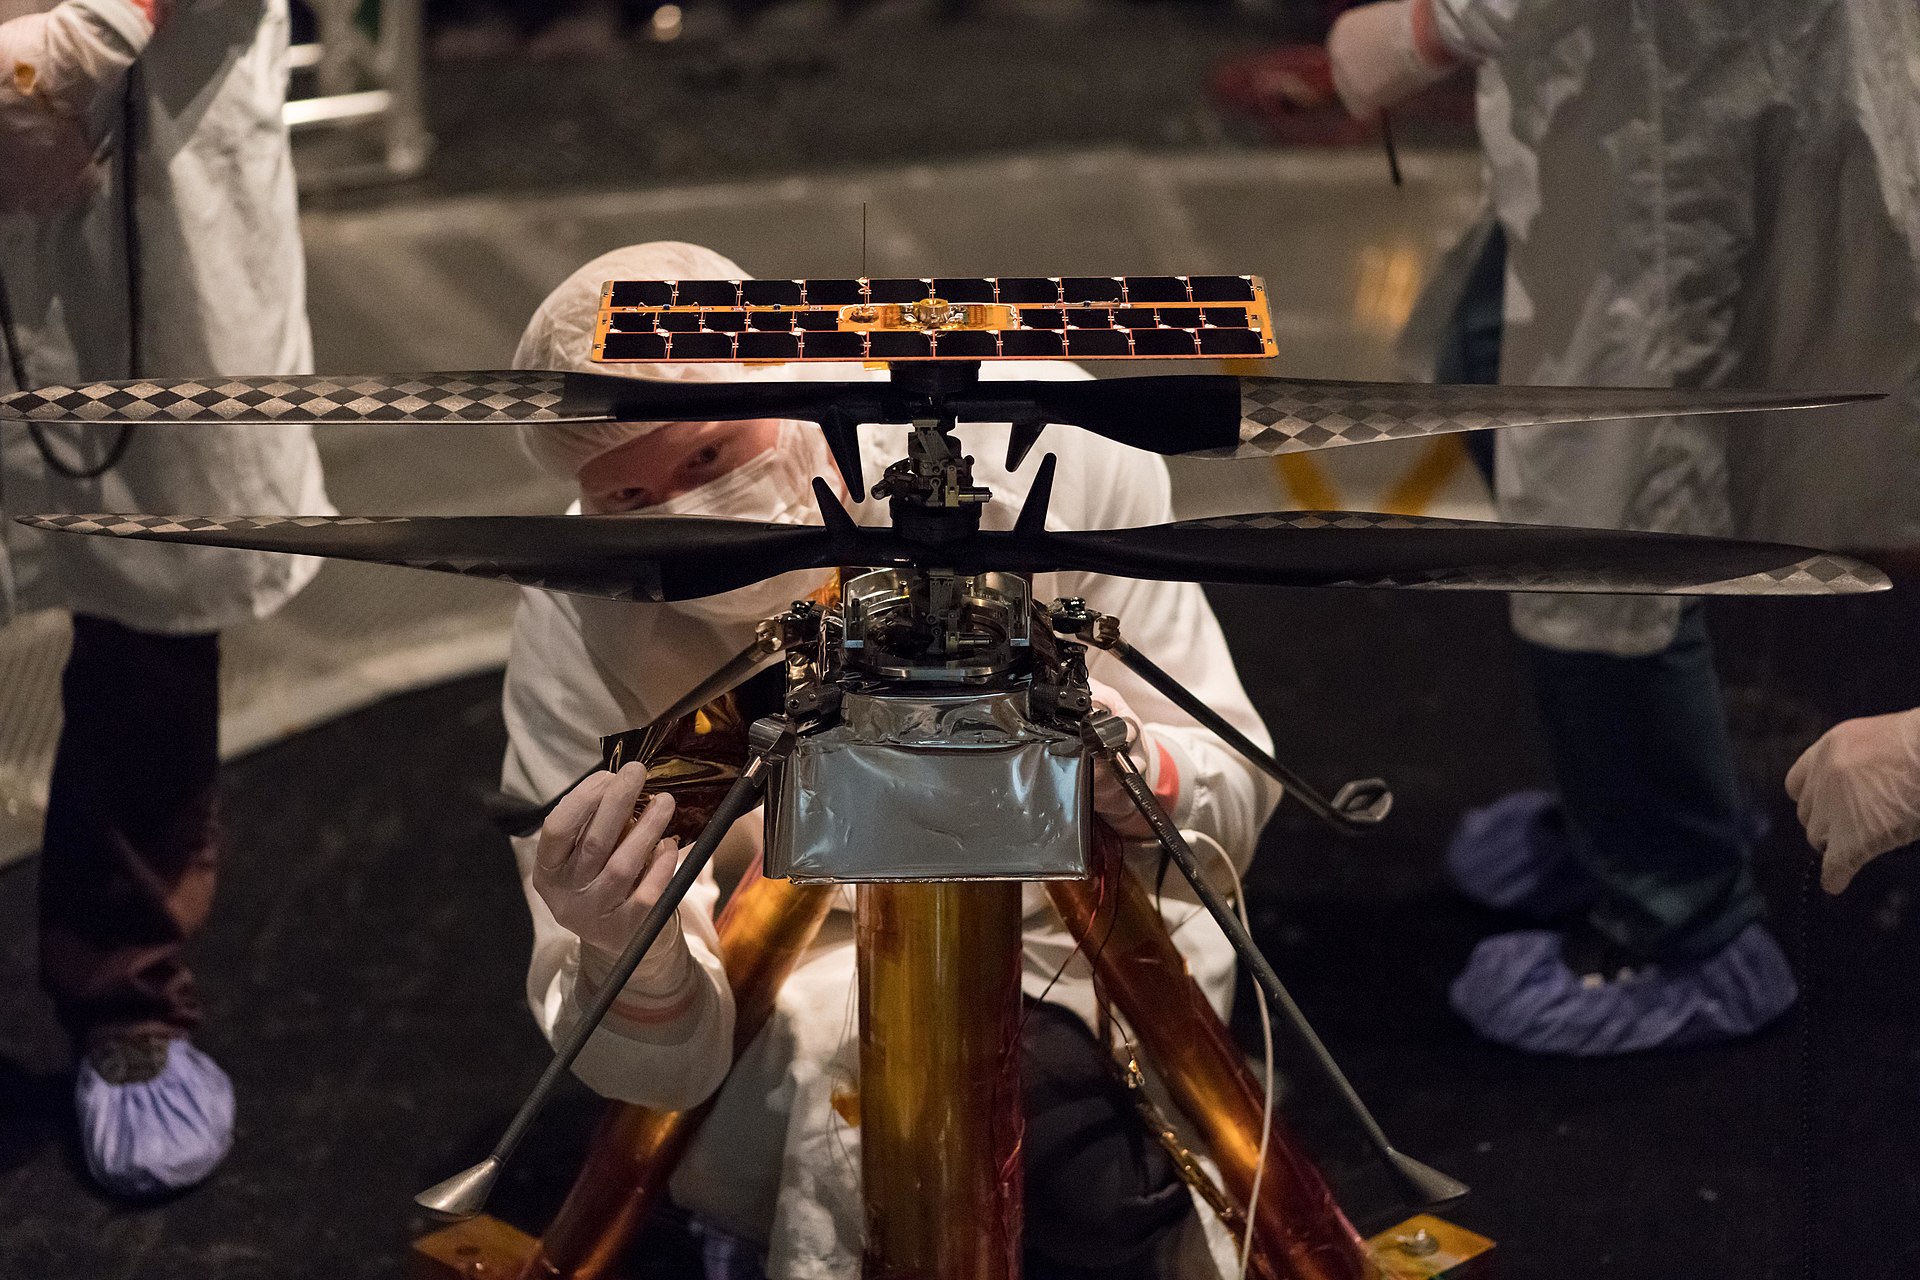 1920px-pia23153-buildingmars2020rover-attachinghelicopter-20190828.jpg